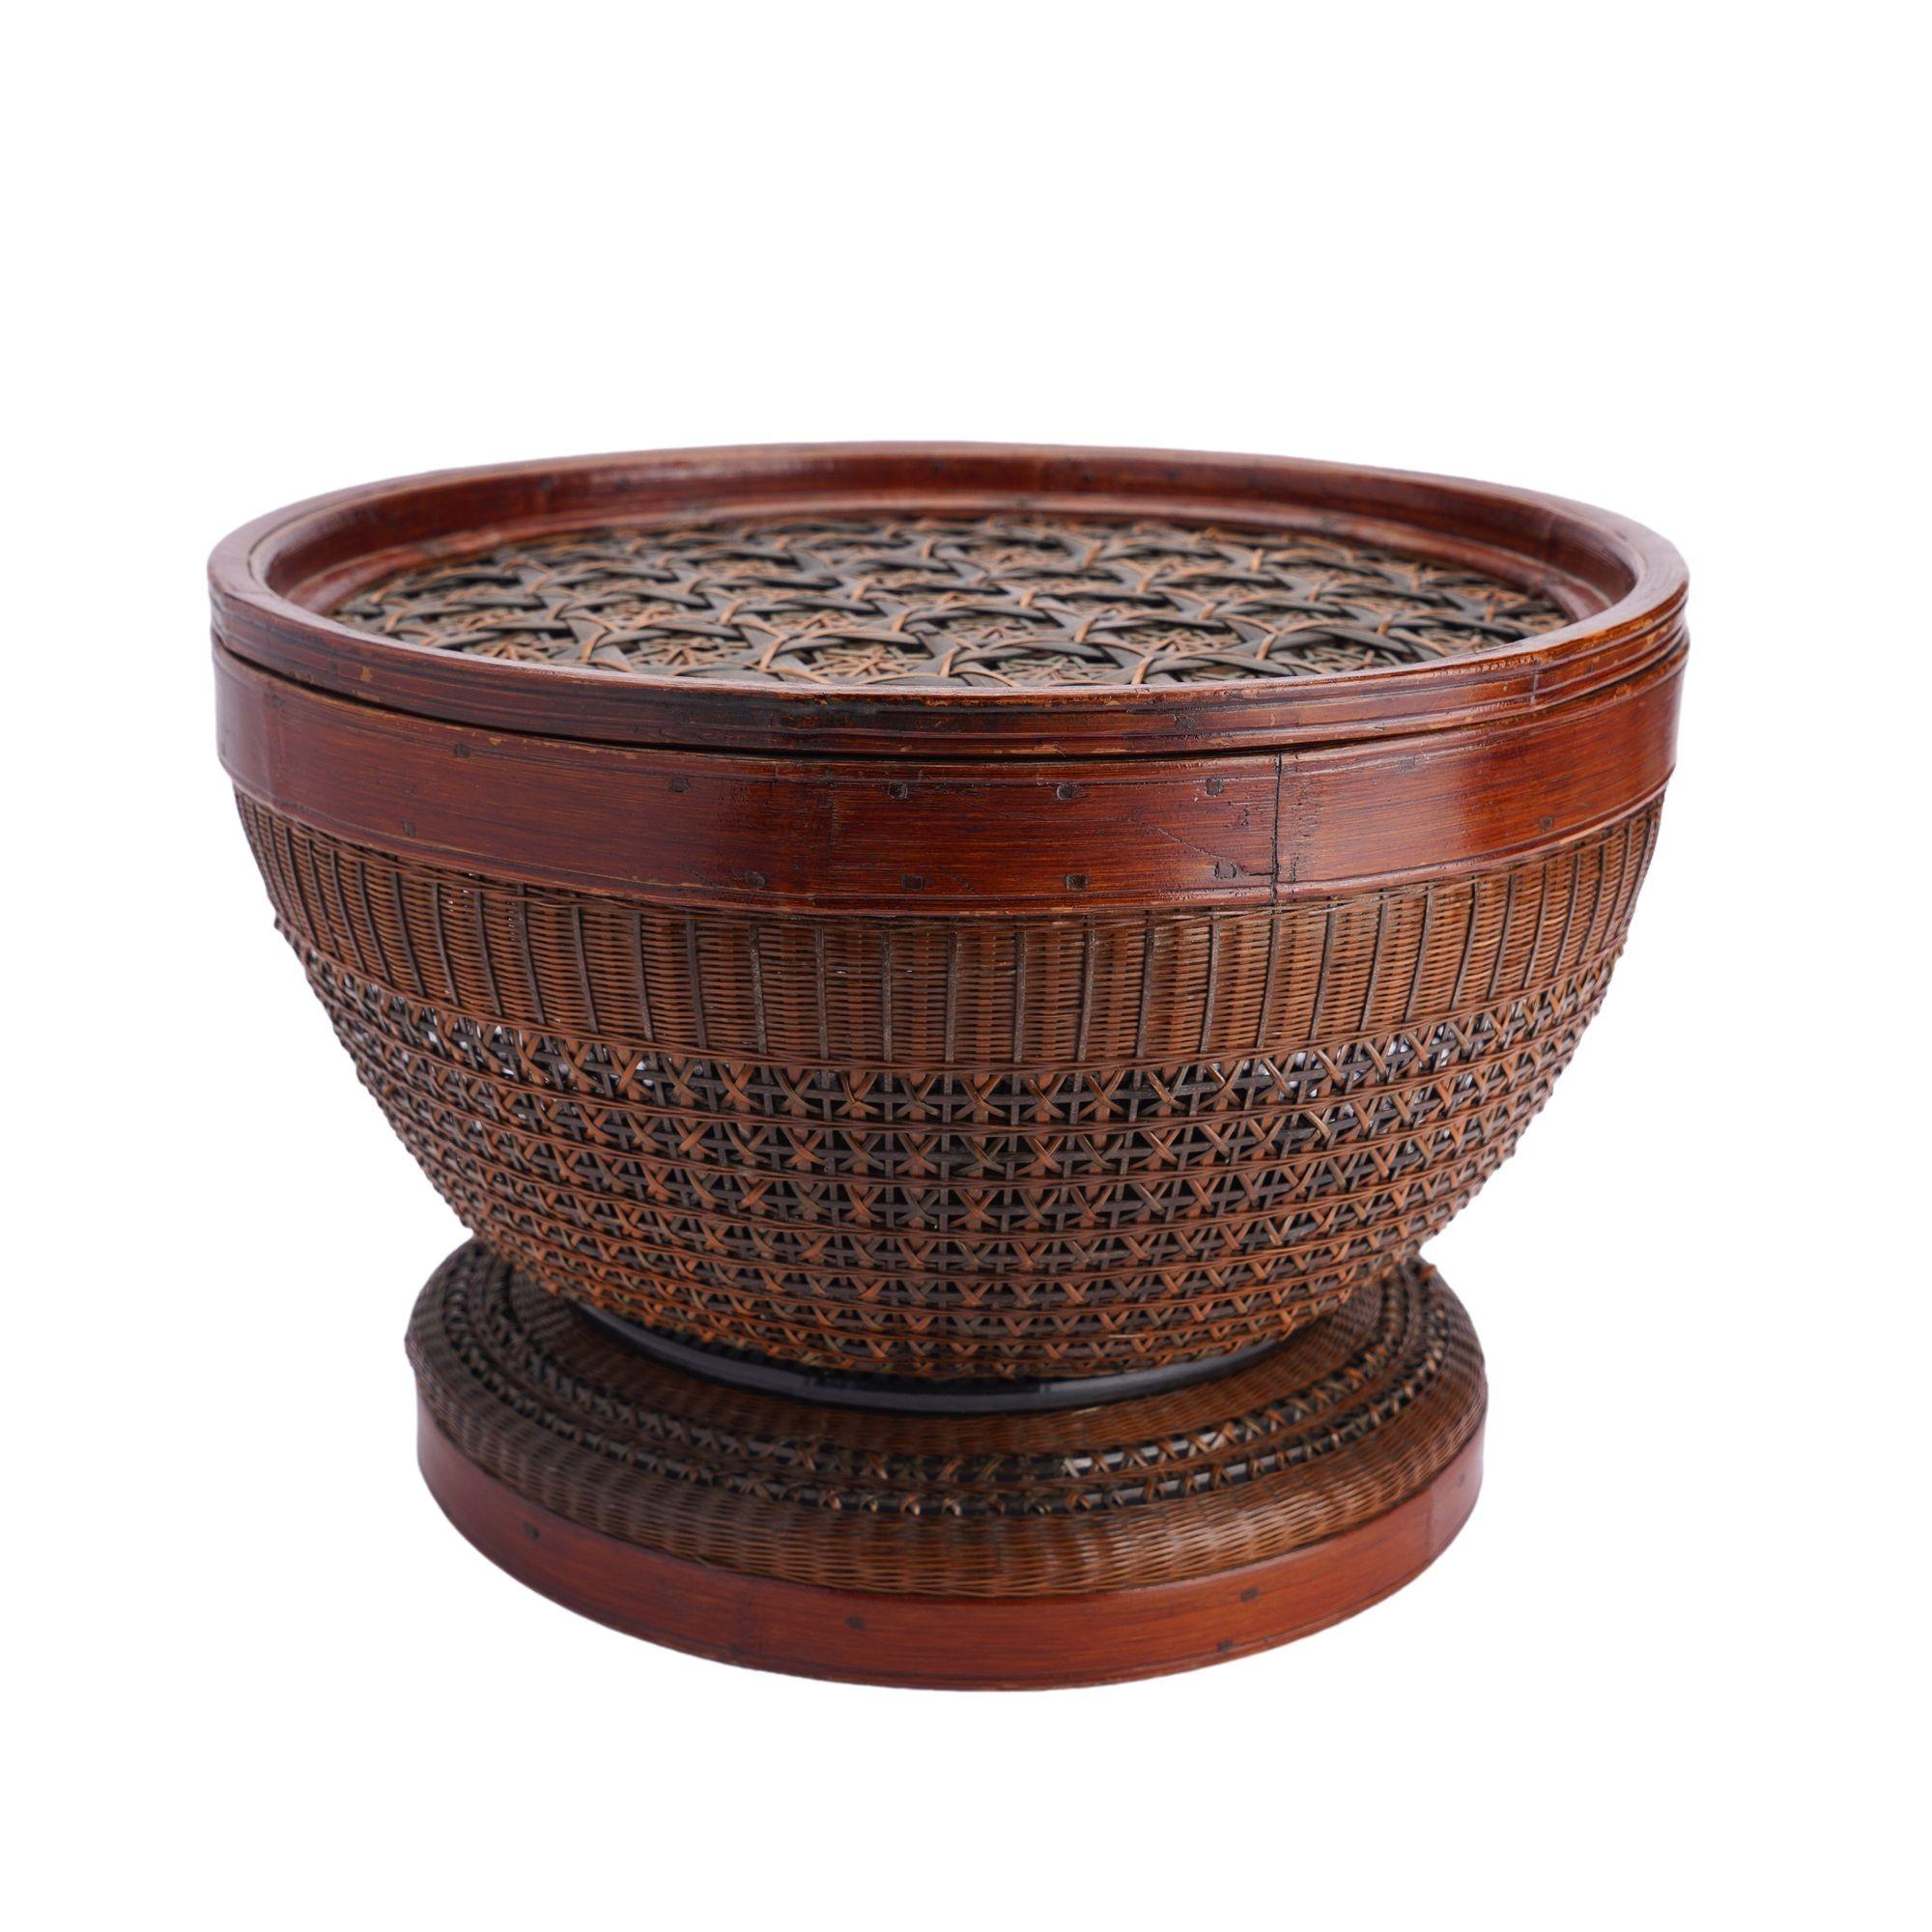 Painstaking hand woven, dyed, and detailed Chinese bamboo betrothal basket with cover. The basket shape is round bowl form on an integrated base, and the thick bamboo rim is fitted with a lid decorated with a layered weaving in the tortoise shell